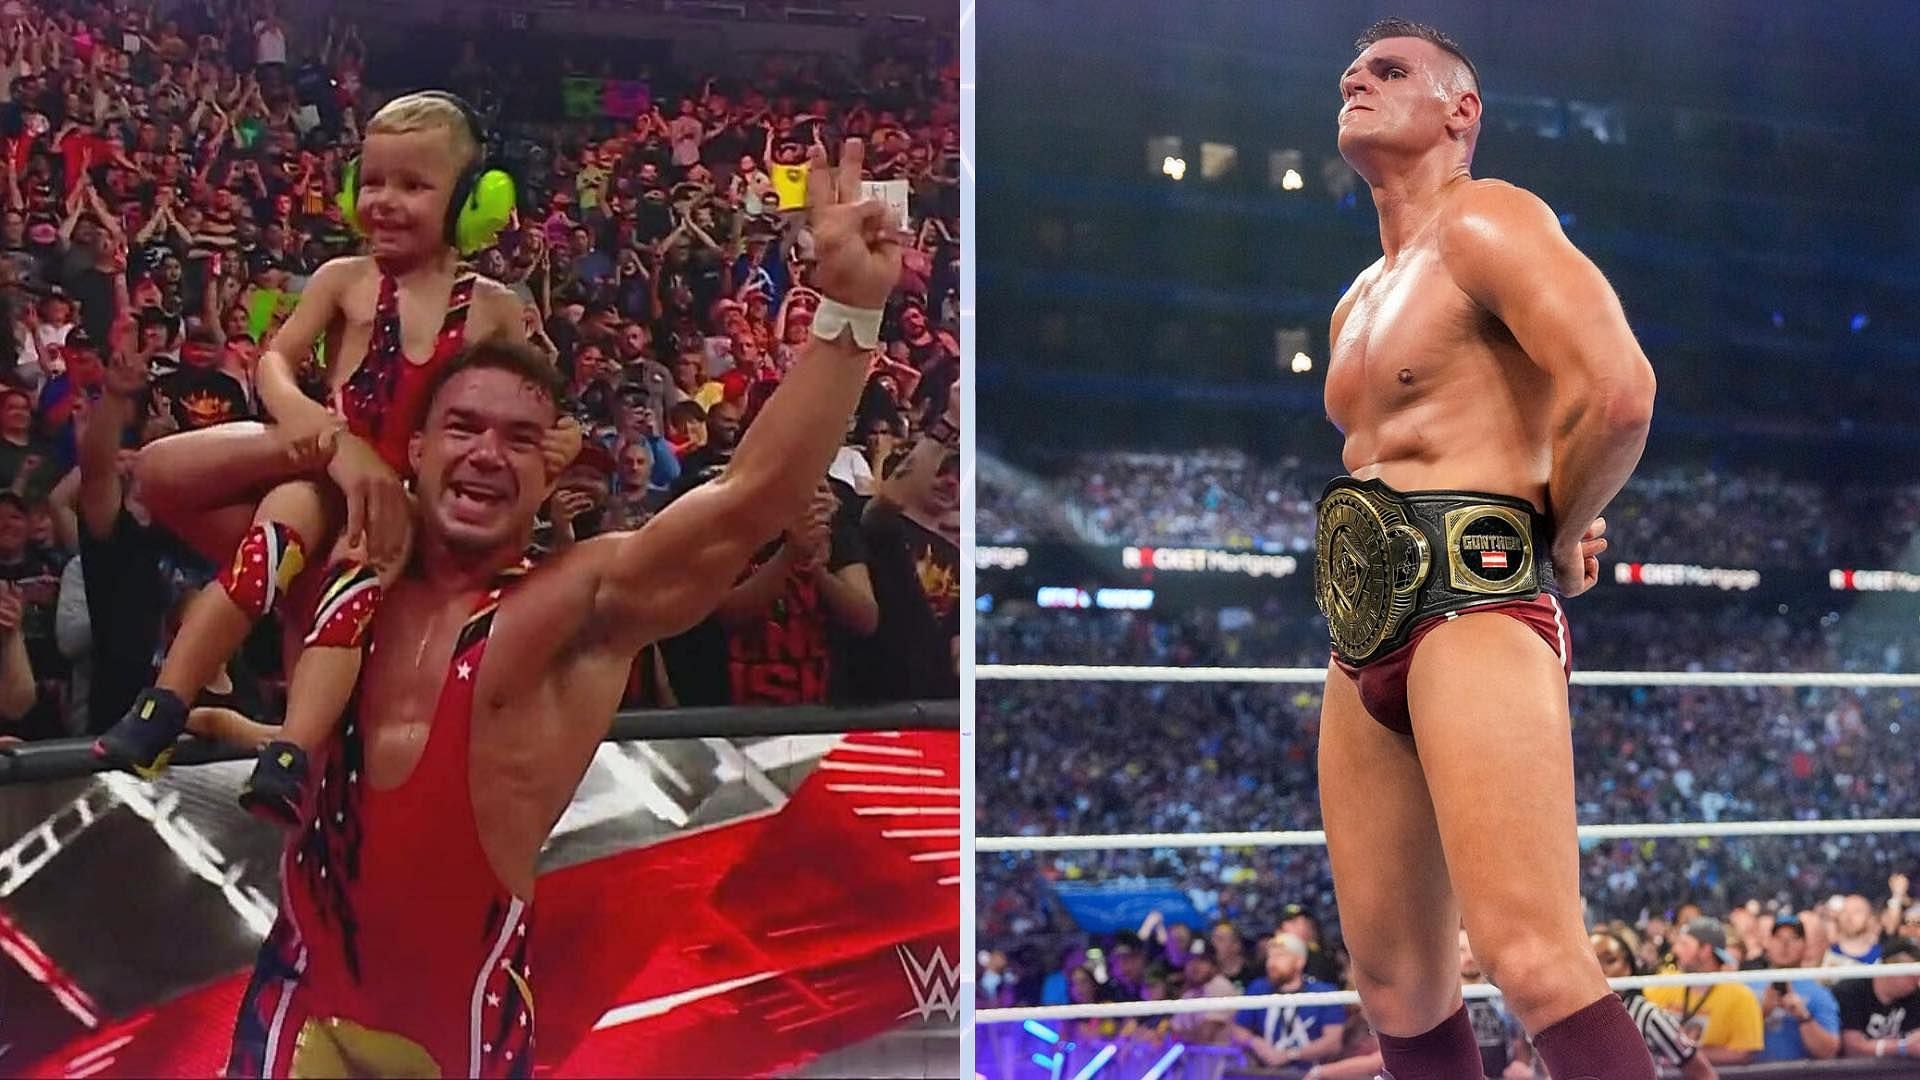 Chad Gable picked up a huge victory on WWE RAW